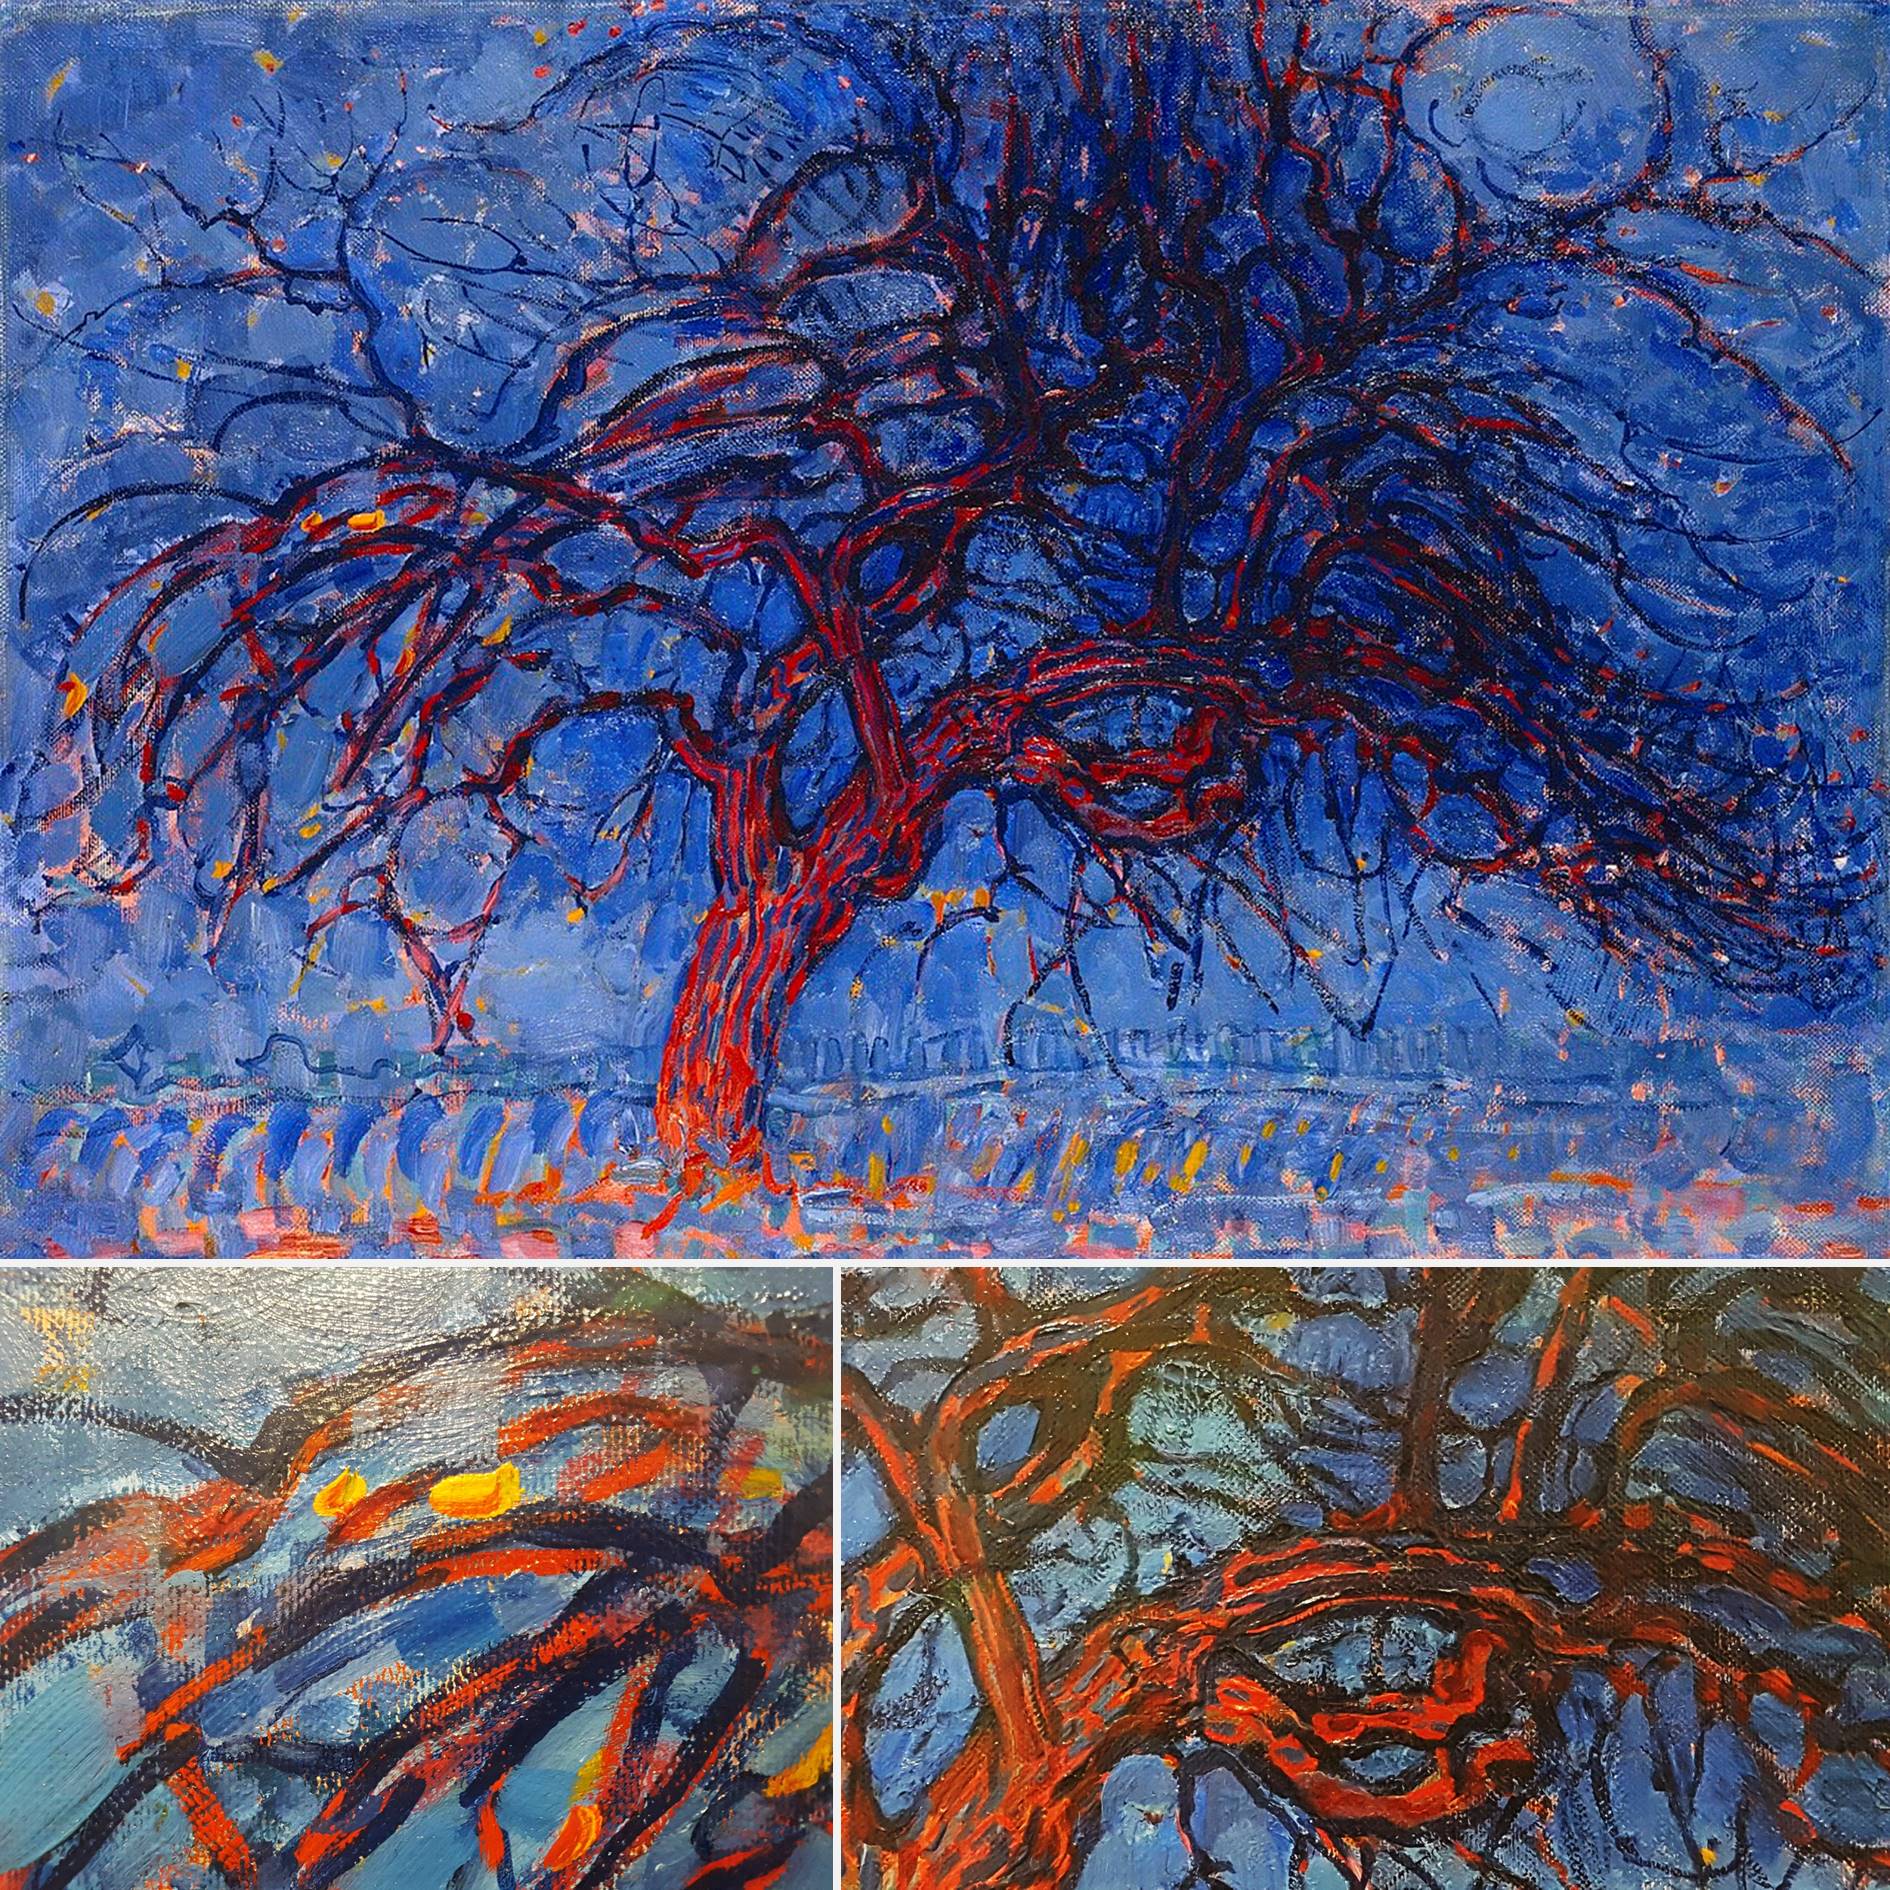 Painting with a stylized red tree against a blue background